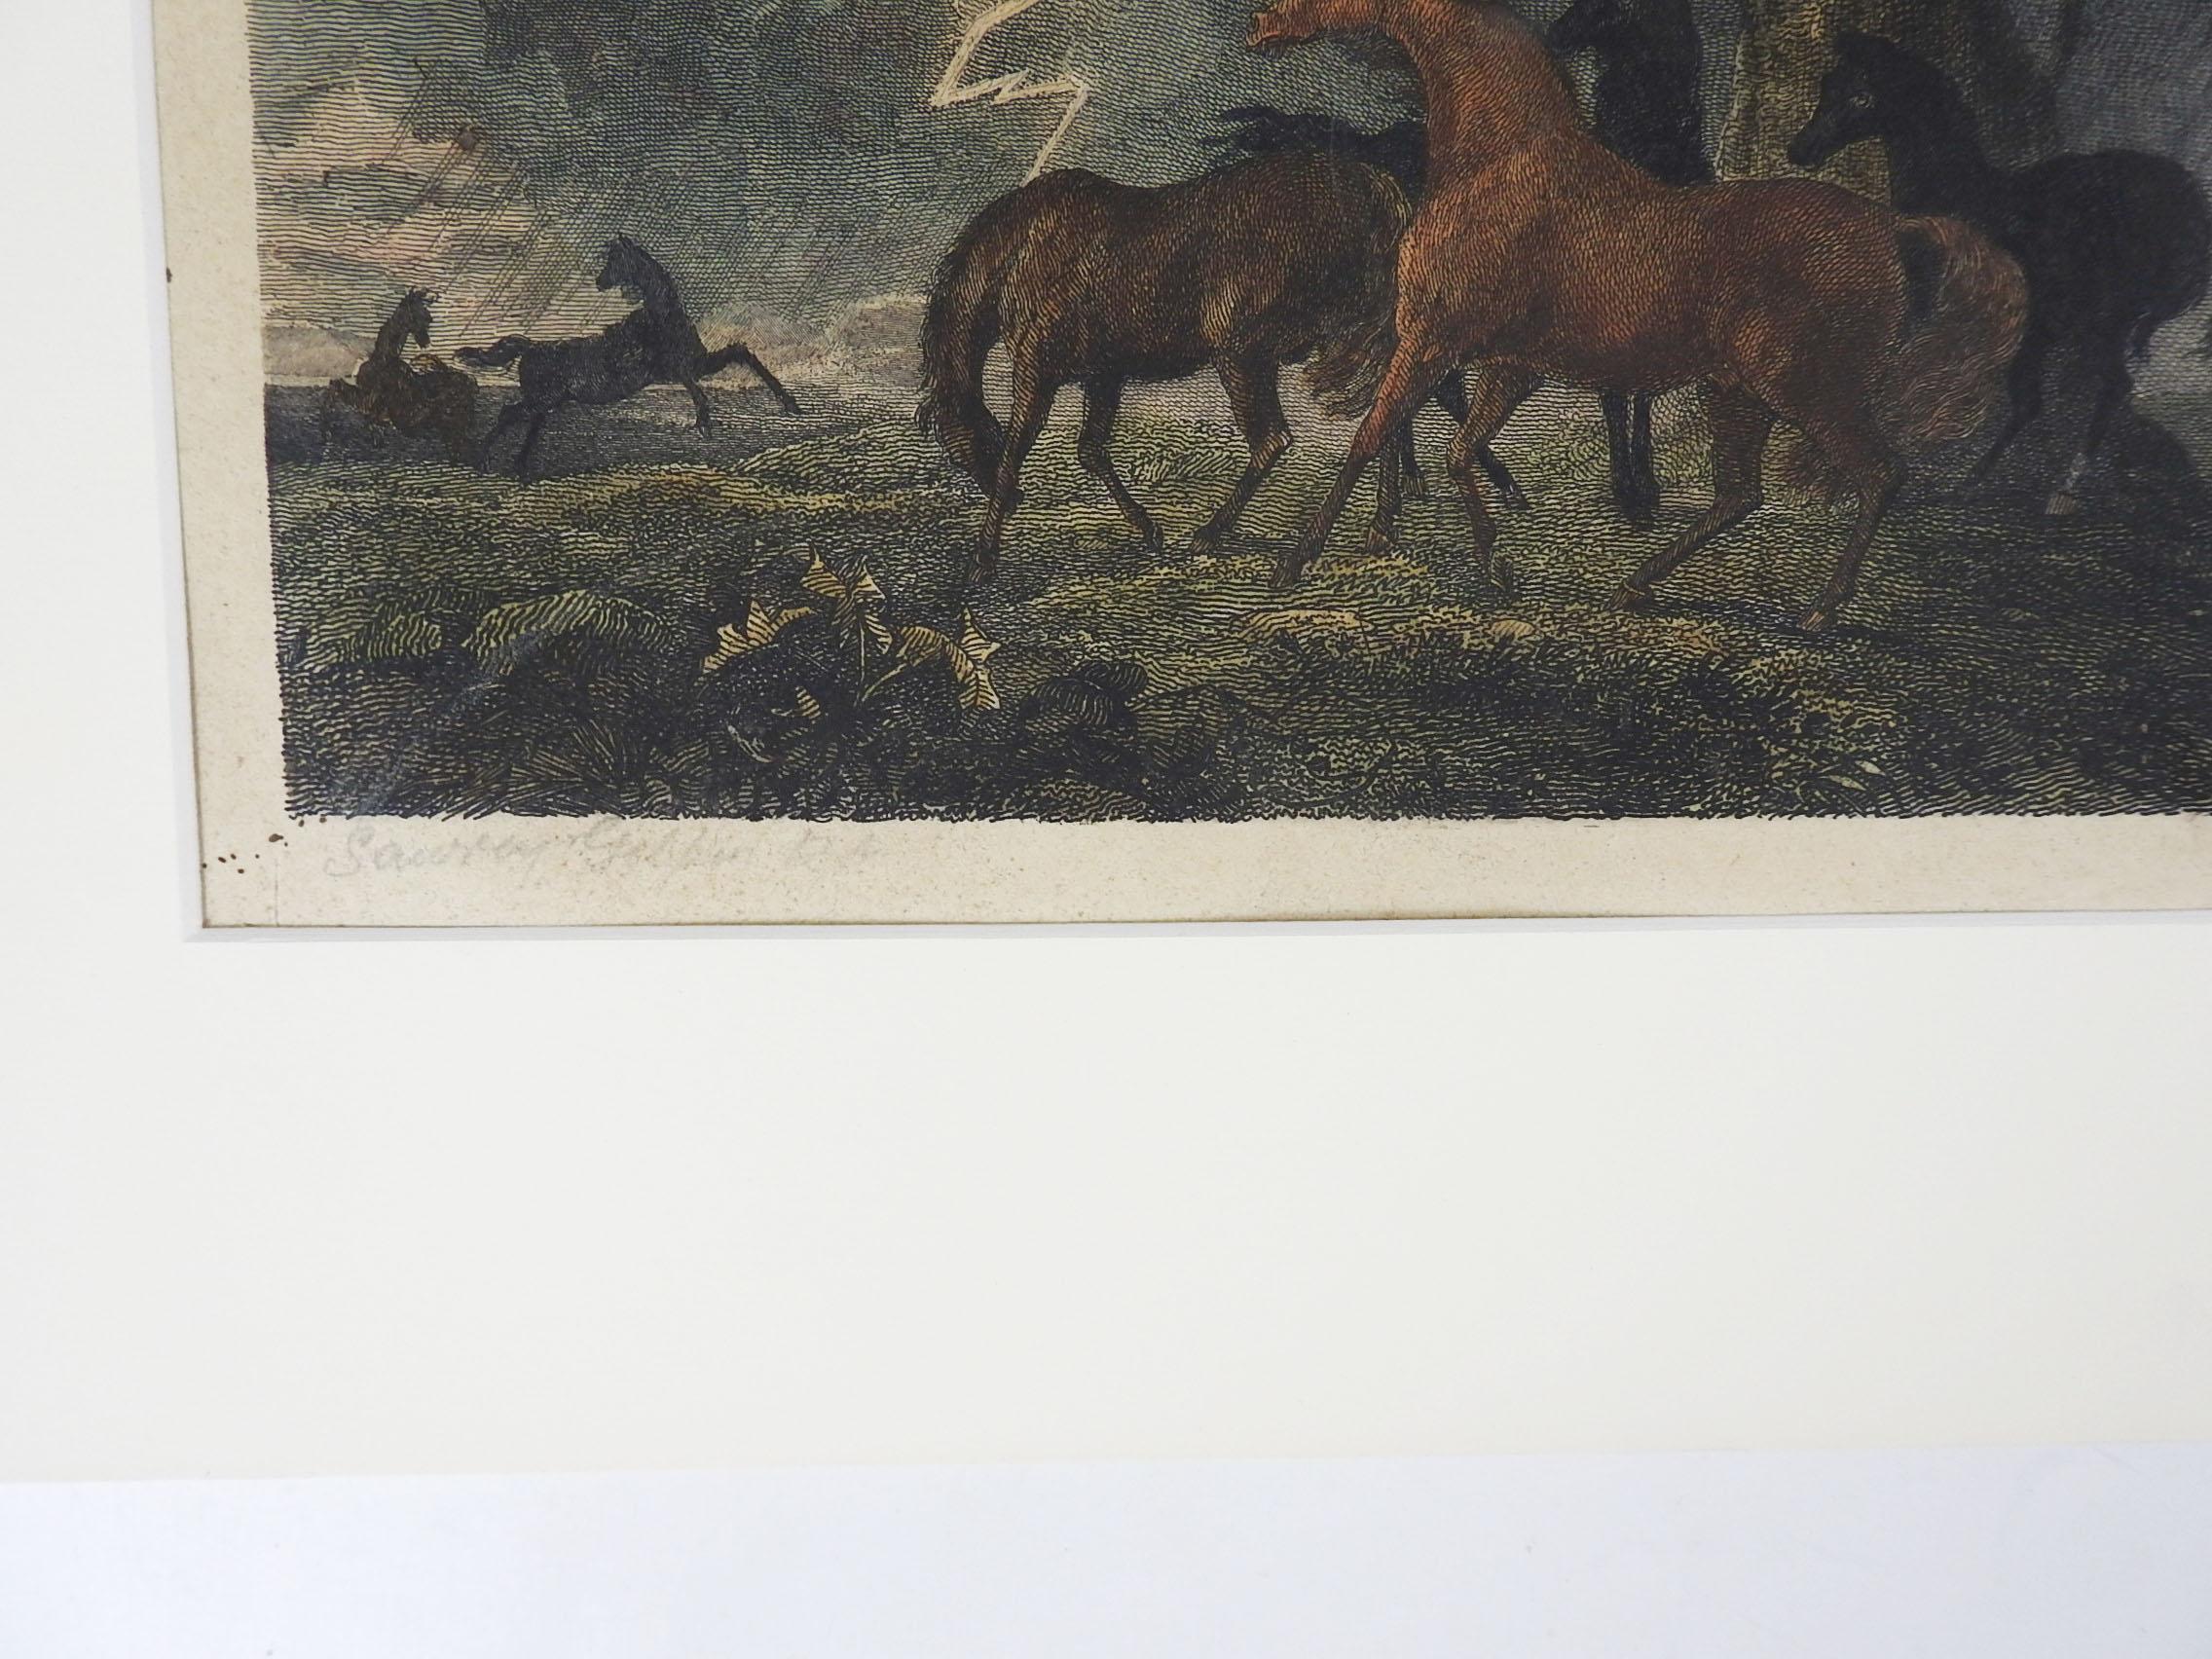 Antique early 19th Century hand colored etching on heavy tan paper after Sawrey Gilpin of horses in thunderstorm. Pencil notation of printer lower left margin Sawrey Gilpin, RA. Unframed, displayed mounted in mat and backing, opening size 9